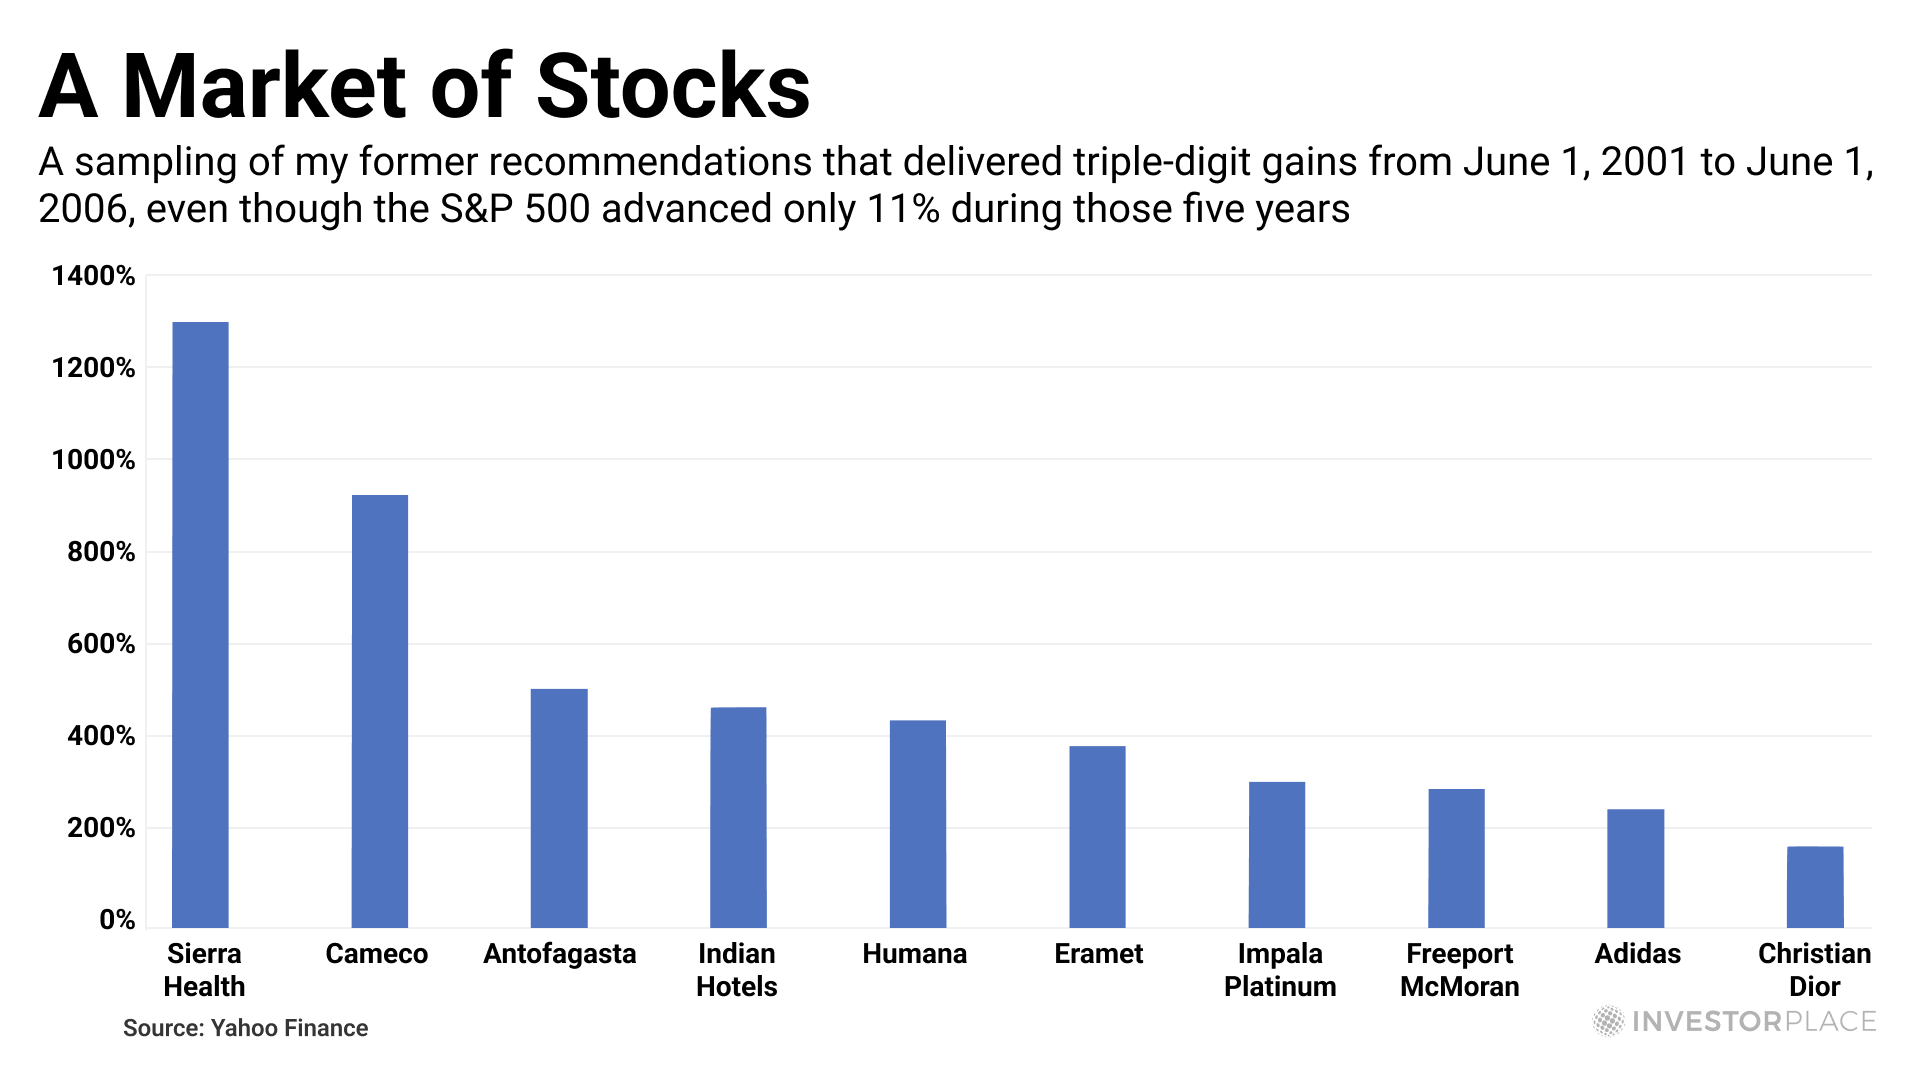 a chart that shows a sampling of Eric Fry's former recommendations that delivered triple-digit gains from 06/01/2022 to 06/01/2006, even though the S&P 500 only advanced 11% during those five years. The gains range from ~1,300% to just under 200%. 